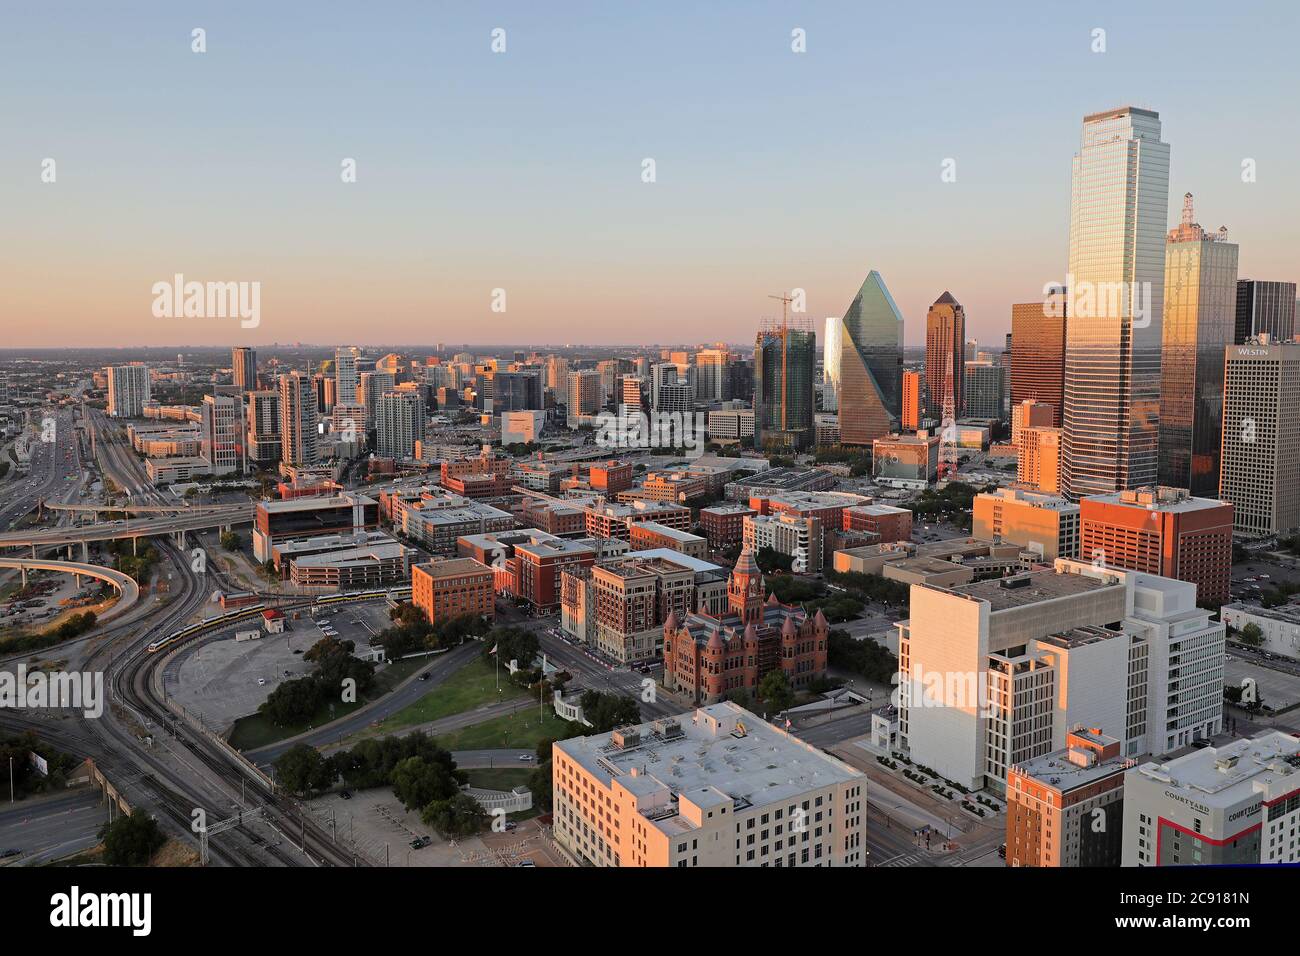 Downtown Dallas in the Golden Hour before sunset. Stock Photo